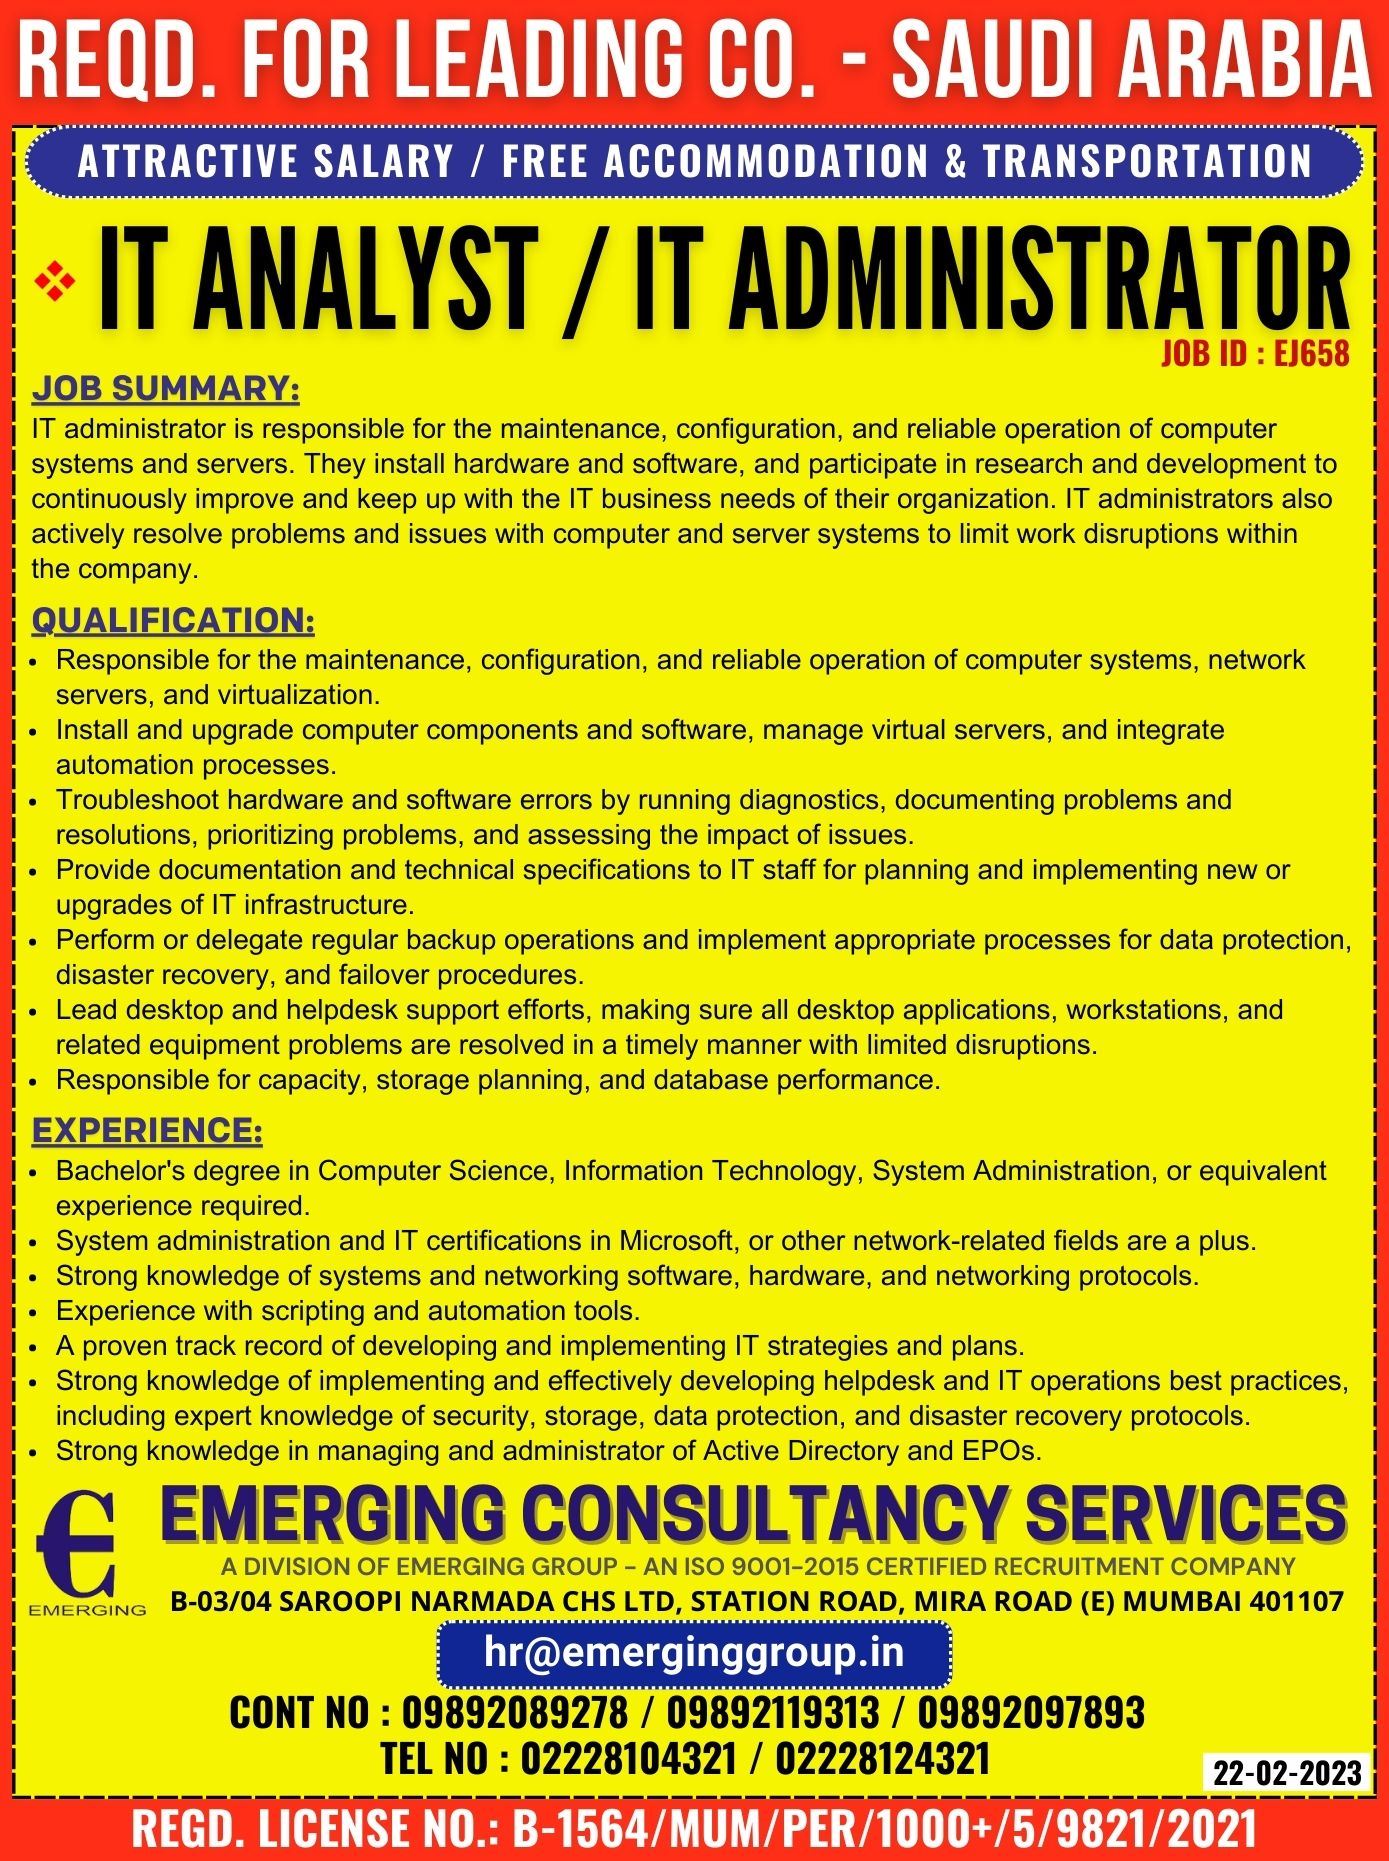 EMERGING CONSULTANCY SERVICES-3b6015f0